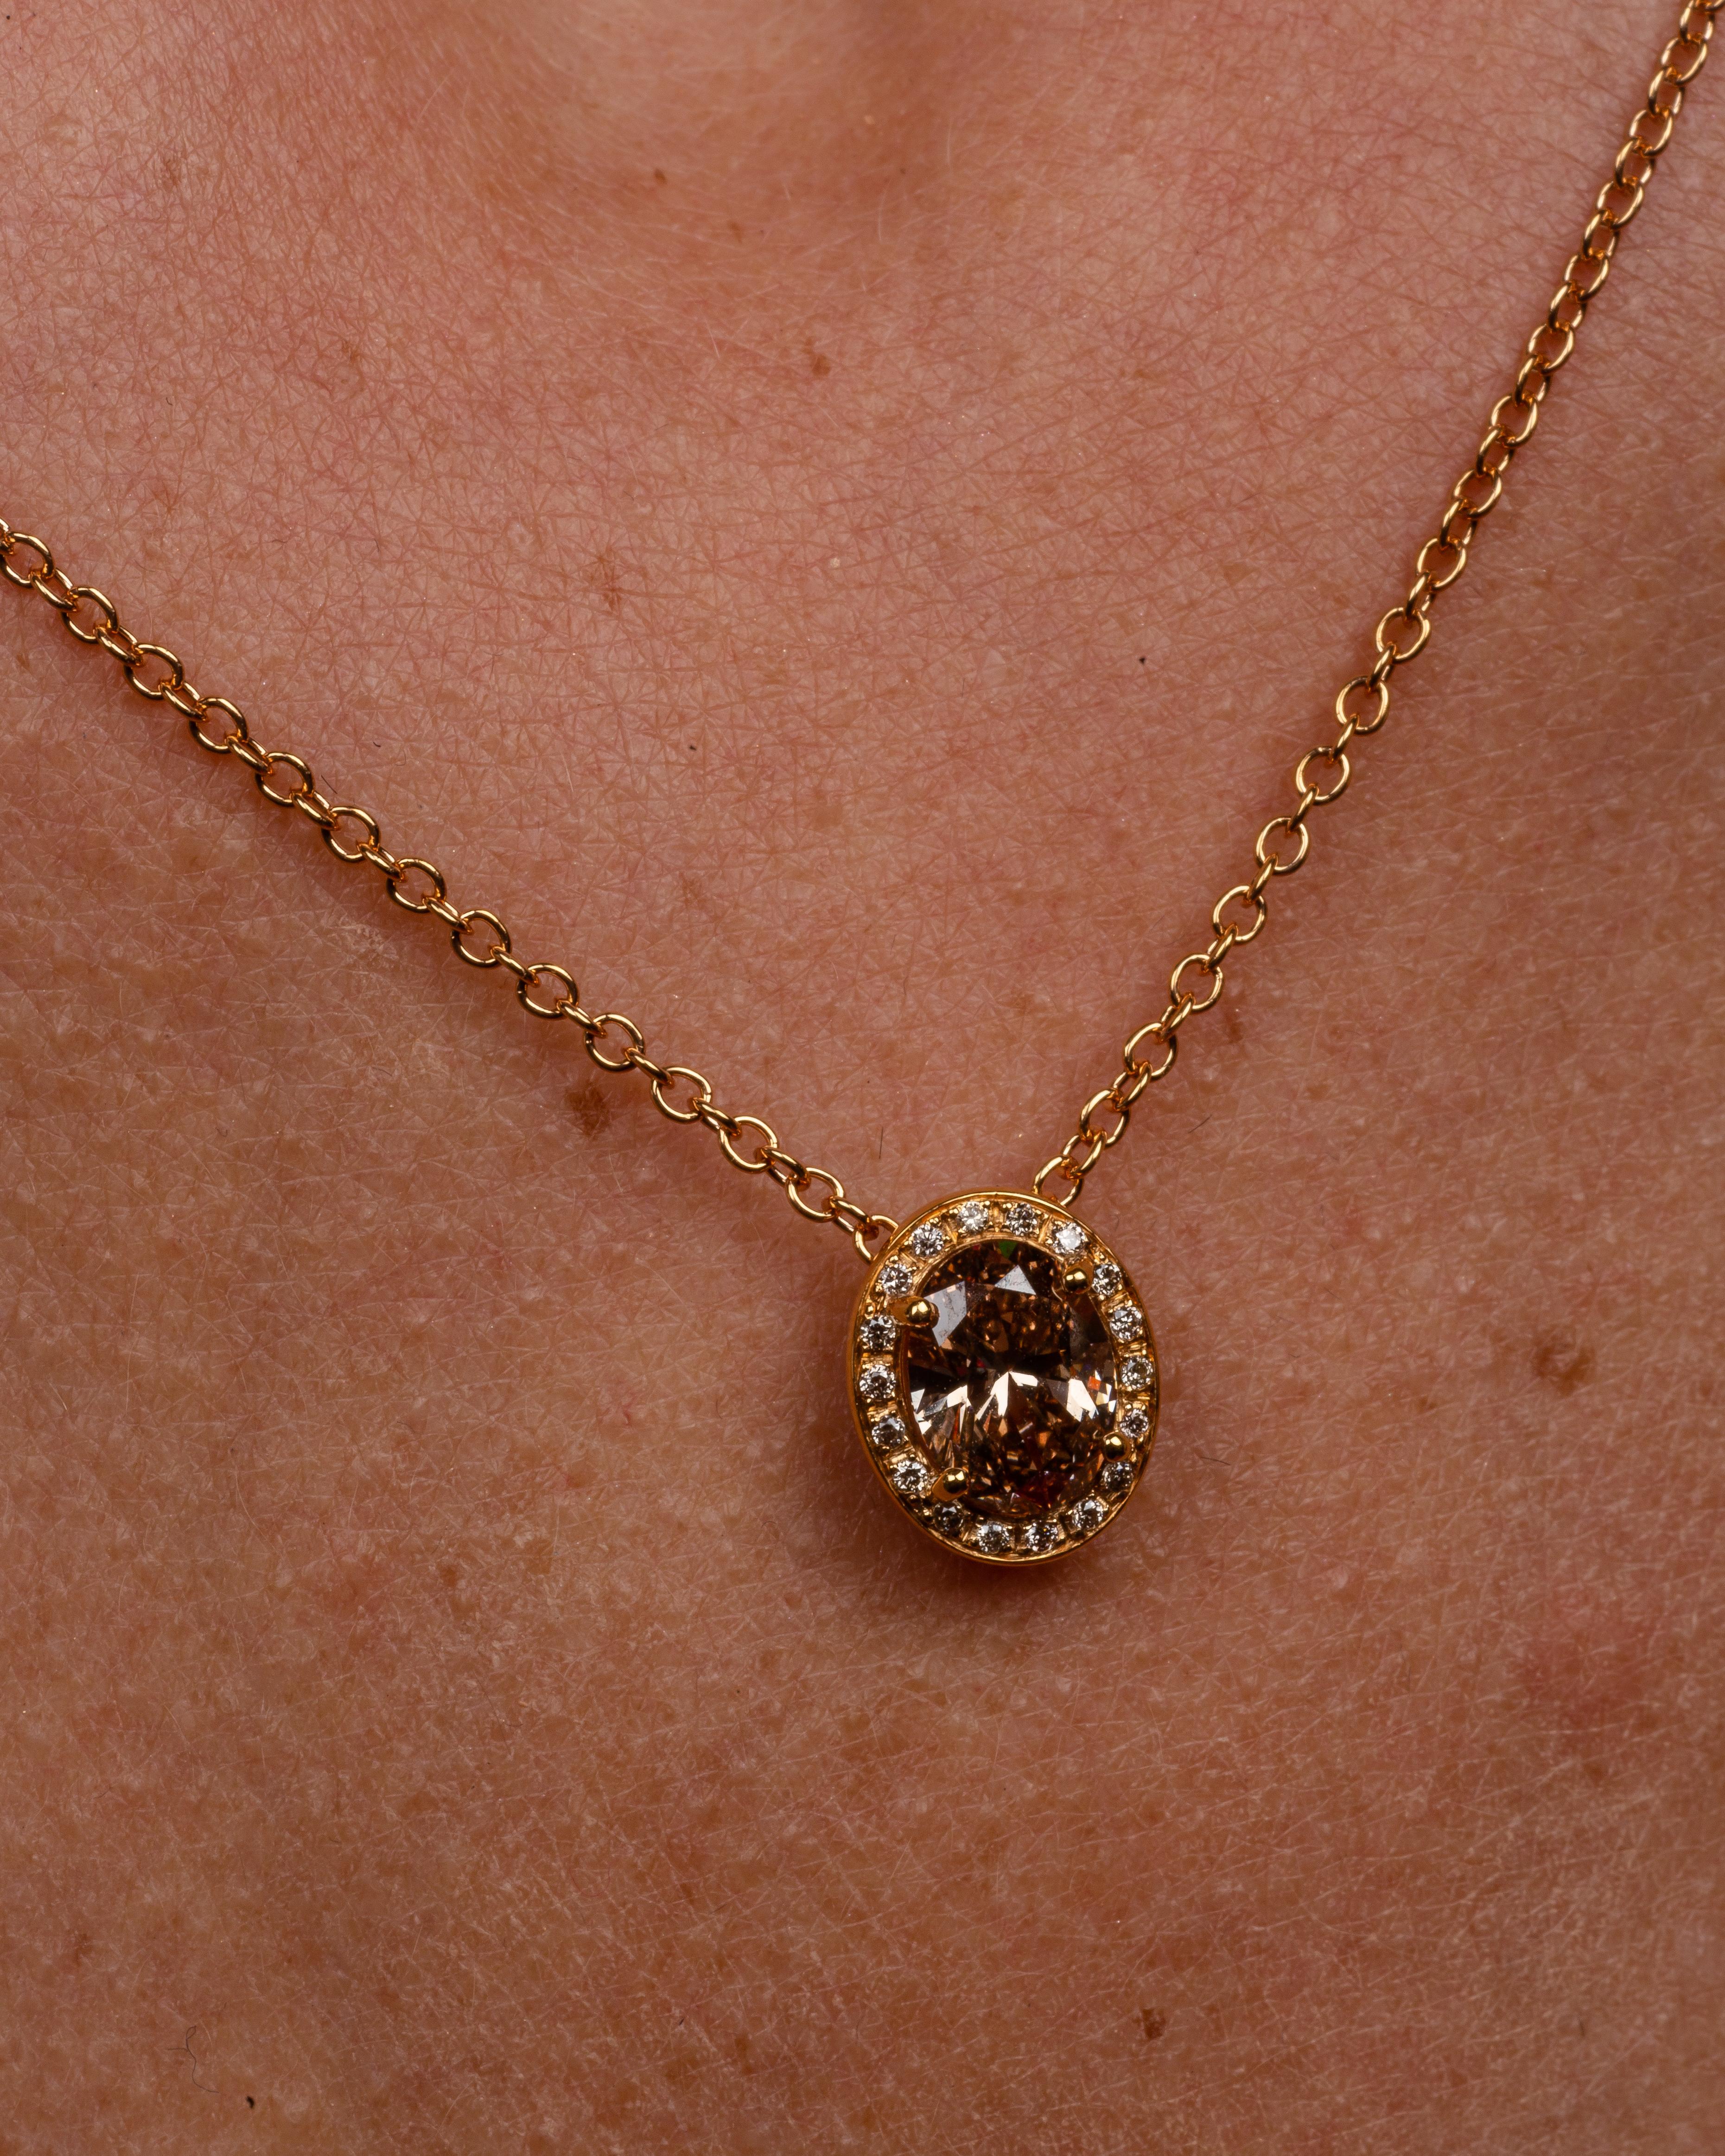 This 18K yellow gold elegant pendant is from our Divine Collection. It is made of an oval brown diamond in total of 1.01 Carat decorated by round colorless diamonds in total of 0.07 Carat and round brown diamonds in total of 0.07 Carat. Total metal